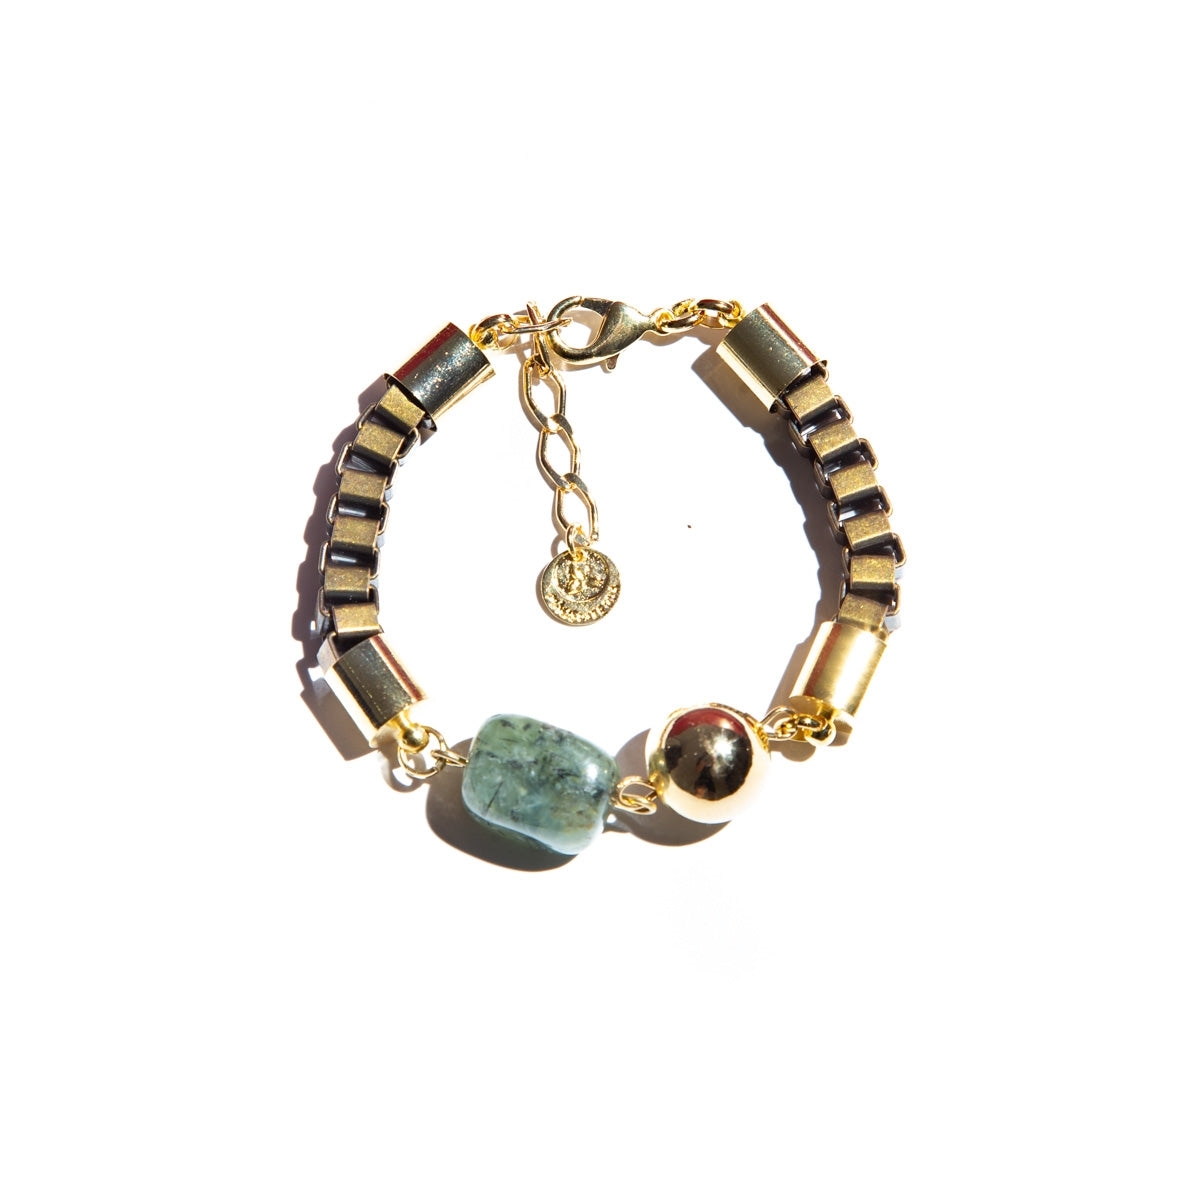 Bracelet with beryl stone and metals plated in gold and antique gold